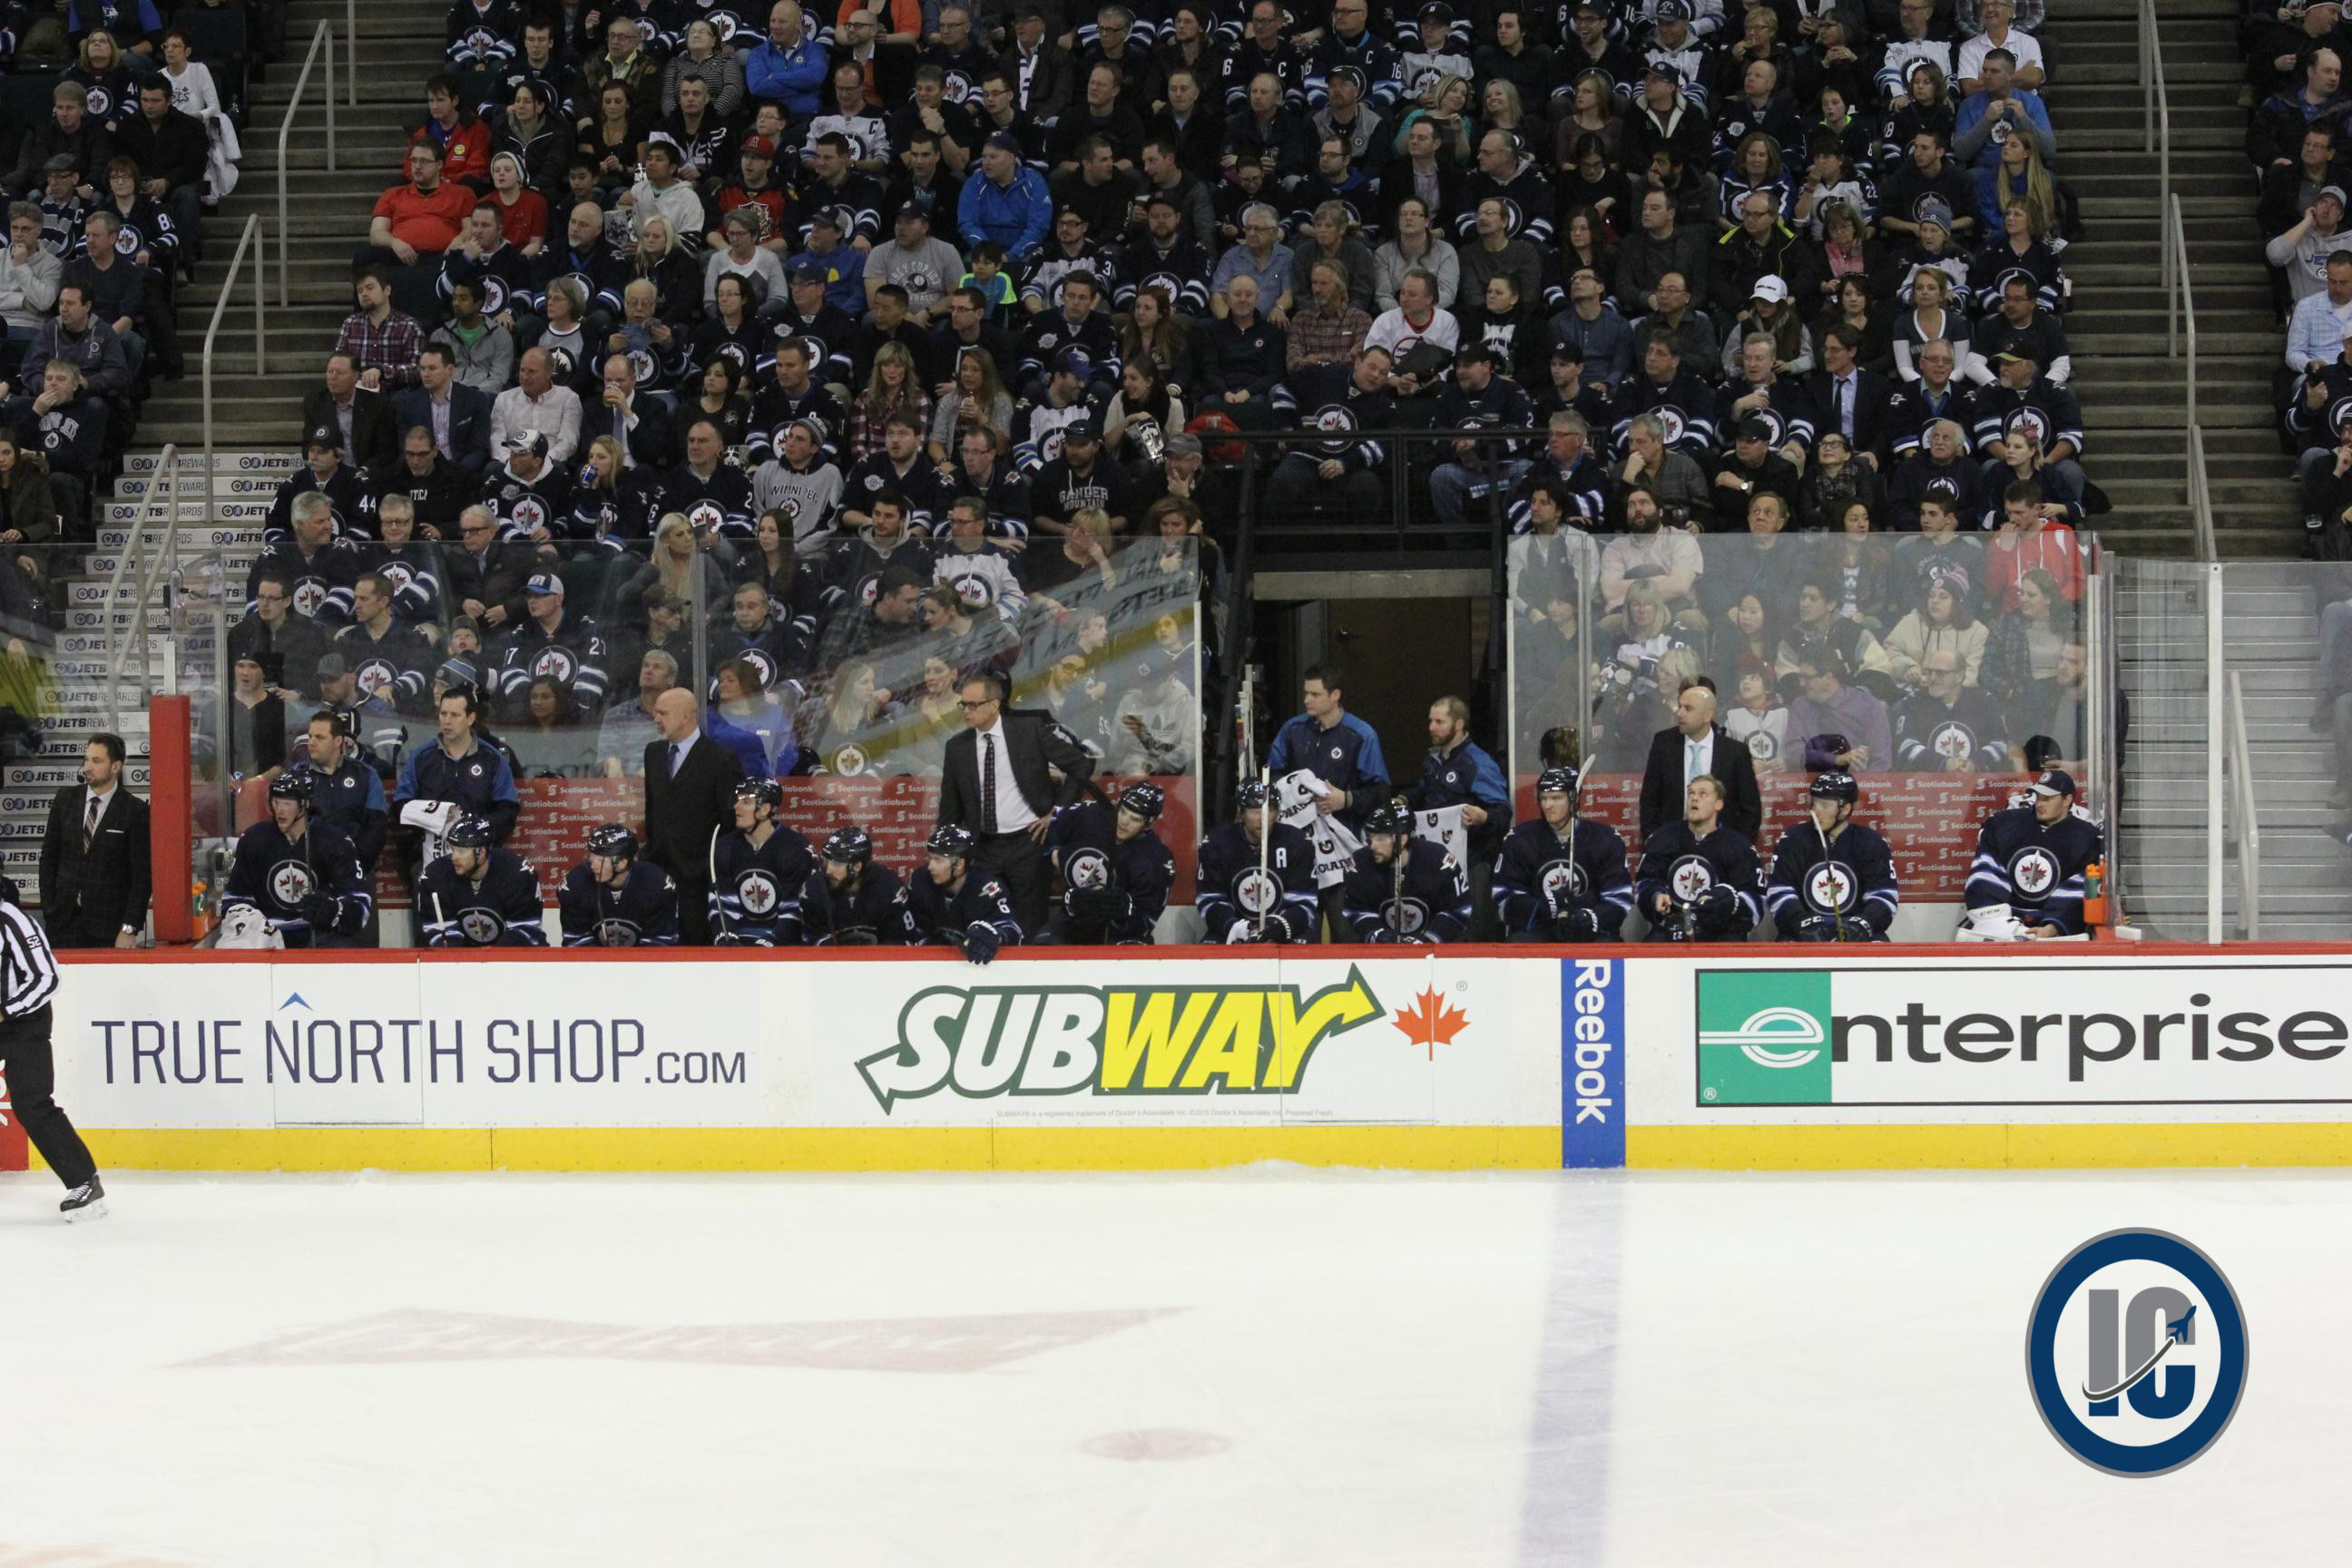 Jets bench March 1